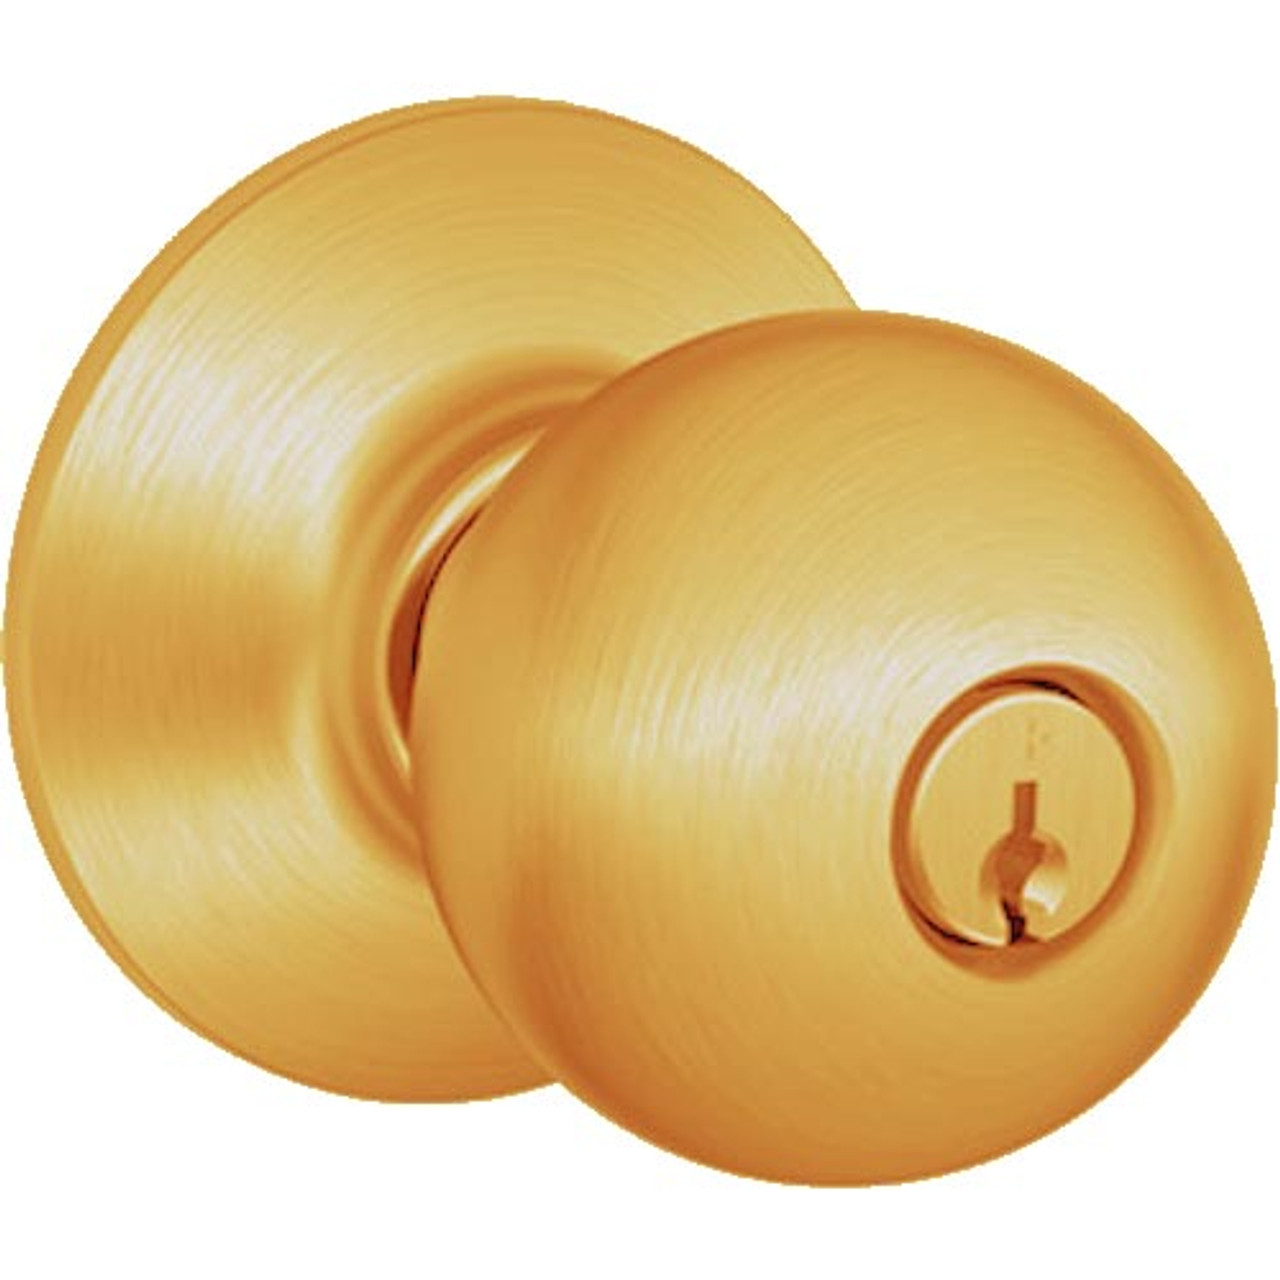 A85PD-ORB-612 Schlage Orbit Commercial Cylindrical Lock in Satin Bronze